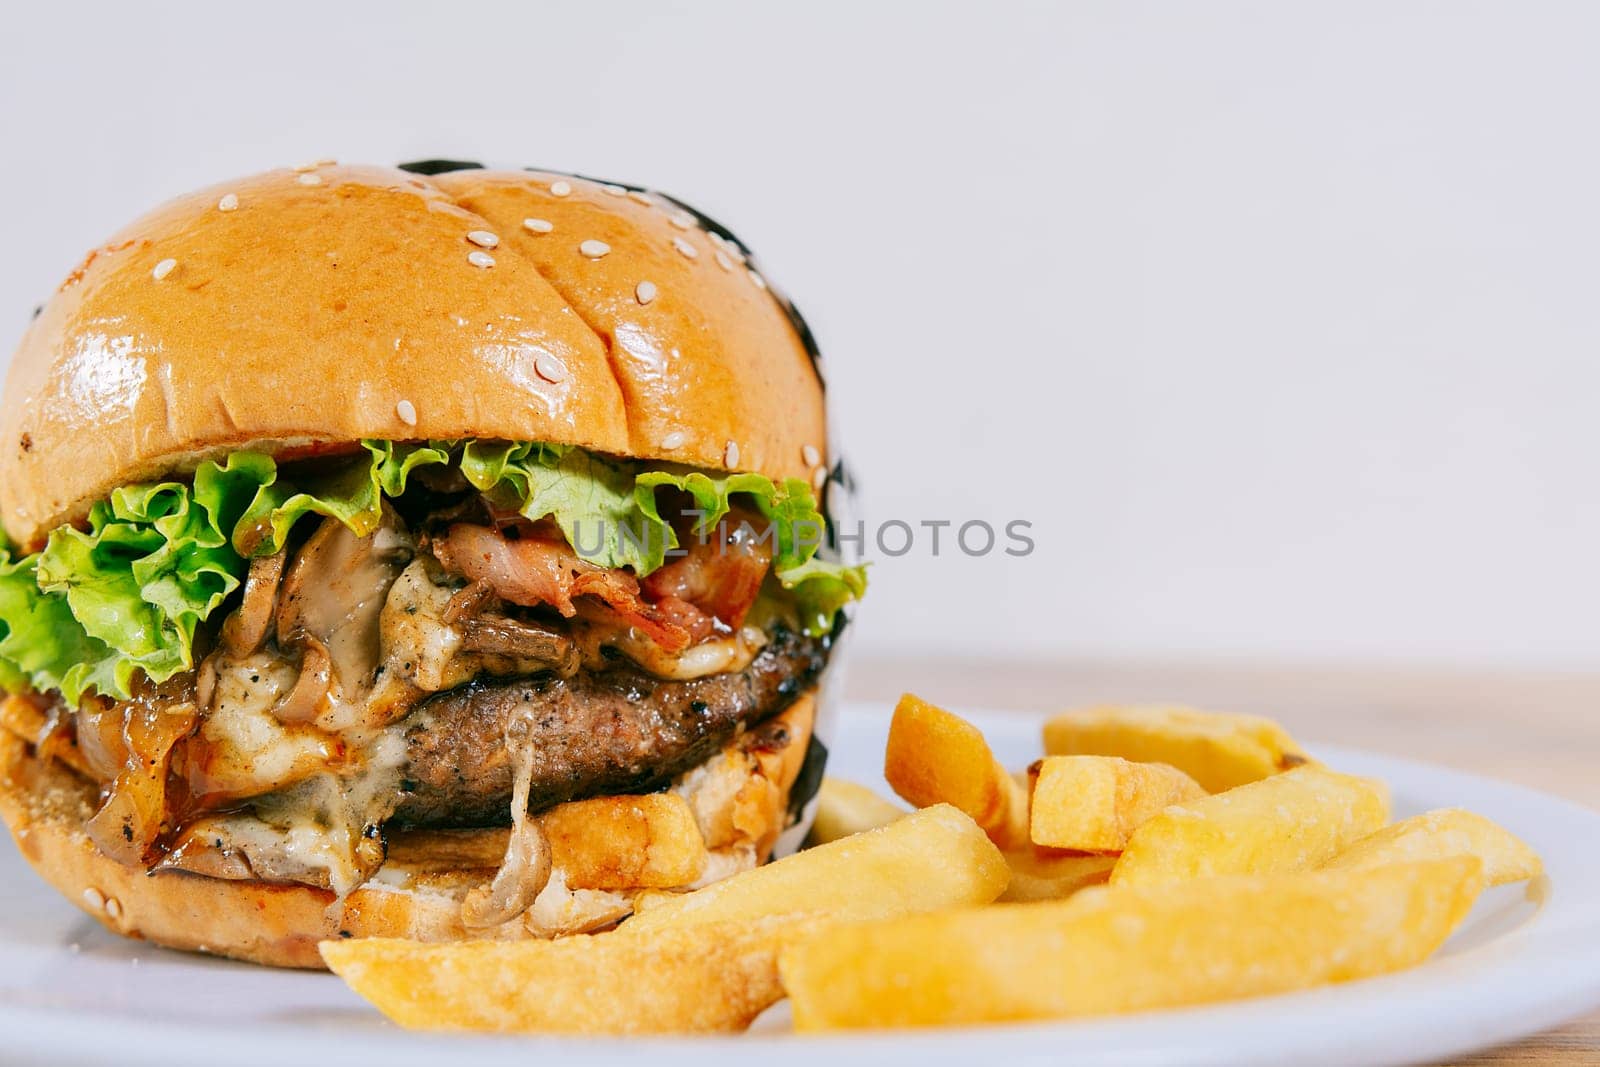 Big cheeseburger with fries served with copy space. Homemade burger with french fries on a plate on wooden table by isaiphoto